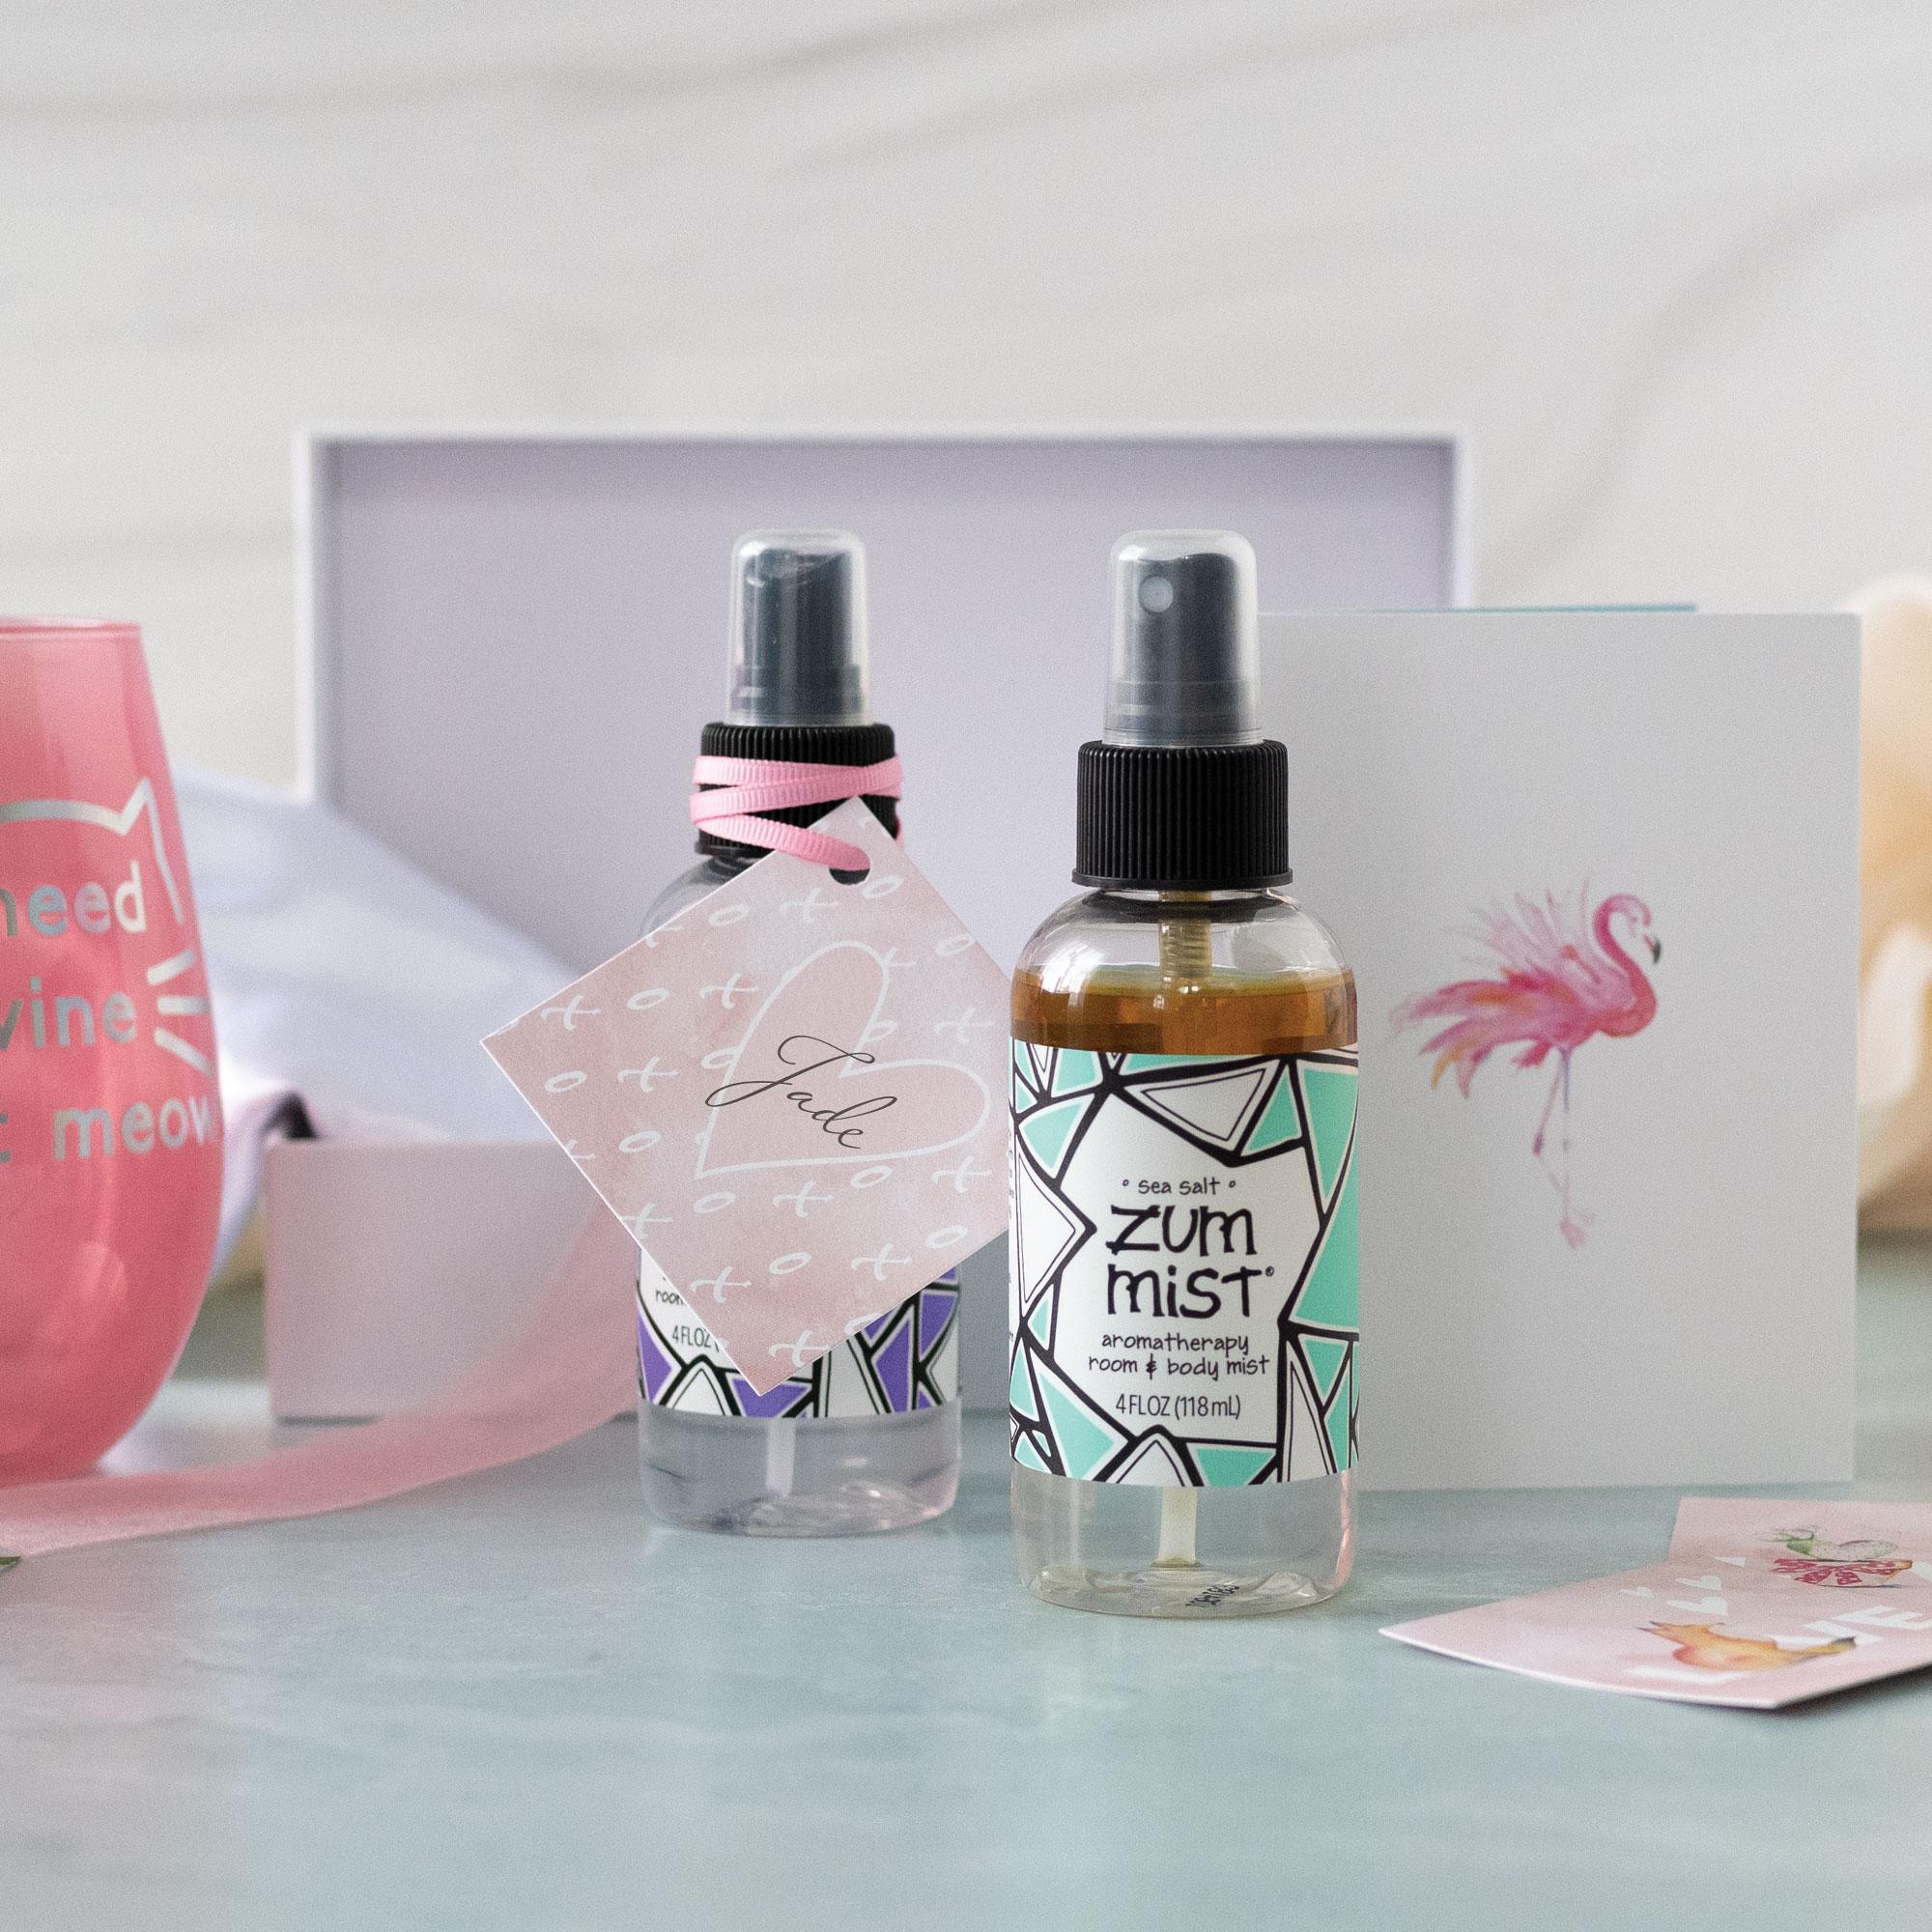 DIY Bridal Party Gift Box features Zum Mist spray, a satin pillowcase and tropical watercolor blank cards to write your bridesmaid proposal. 